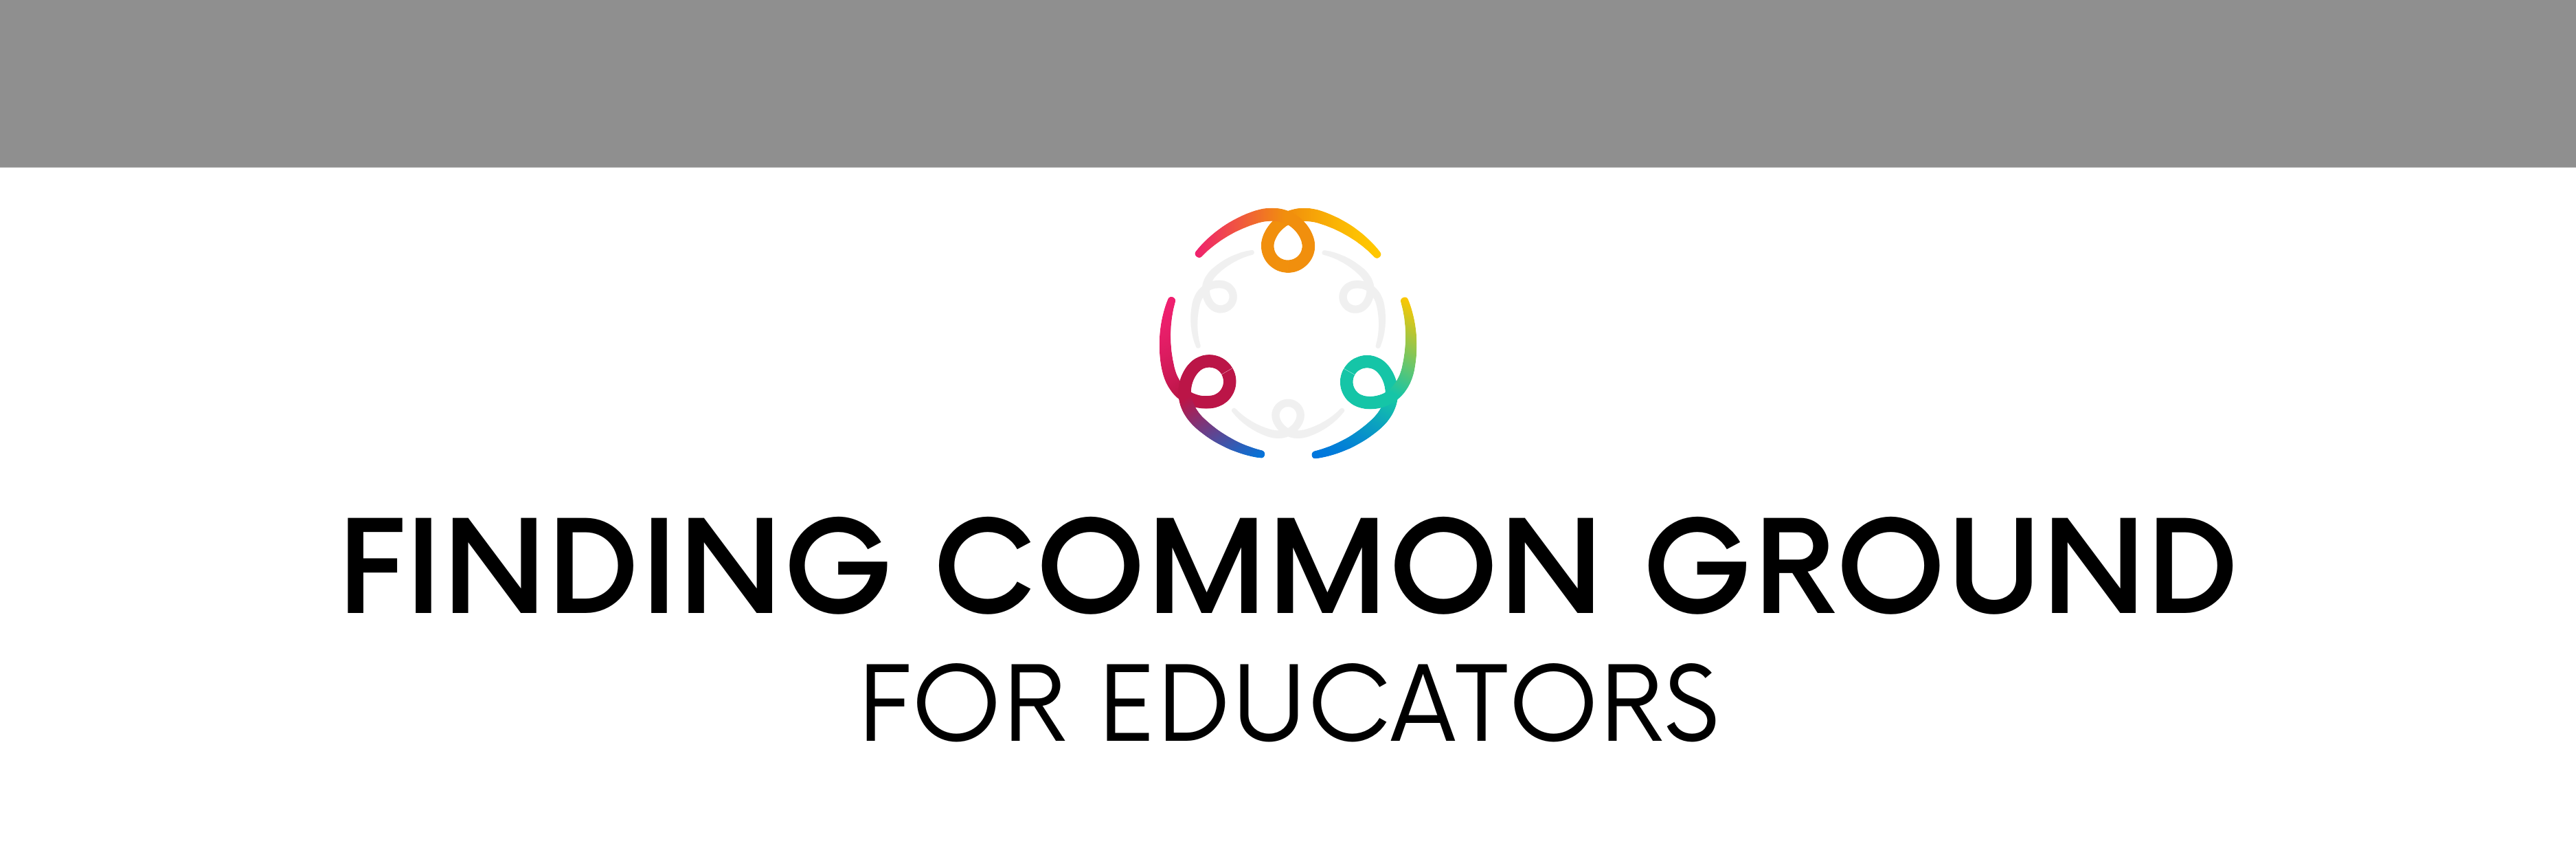 Finding Common Ground for Educators course header image